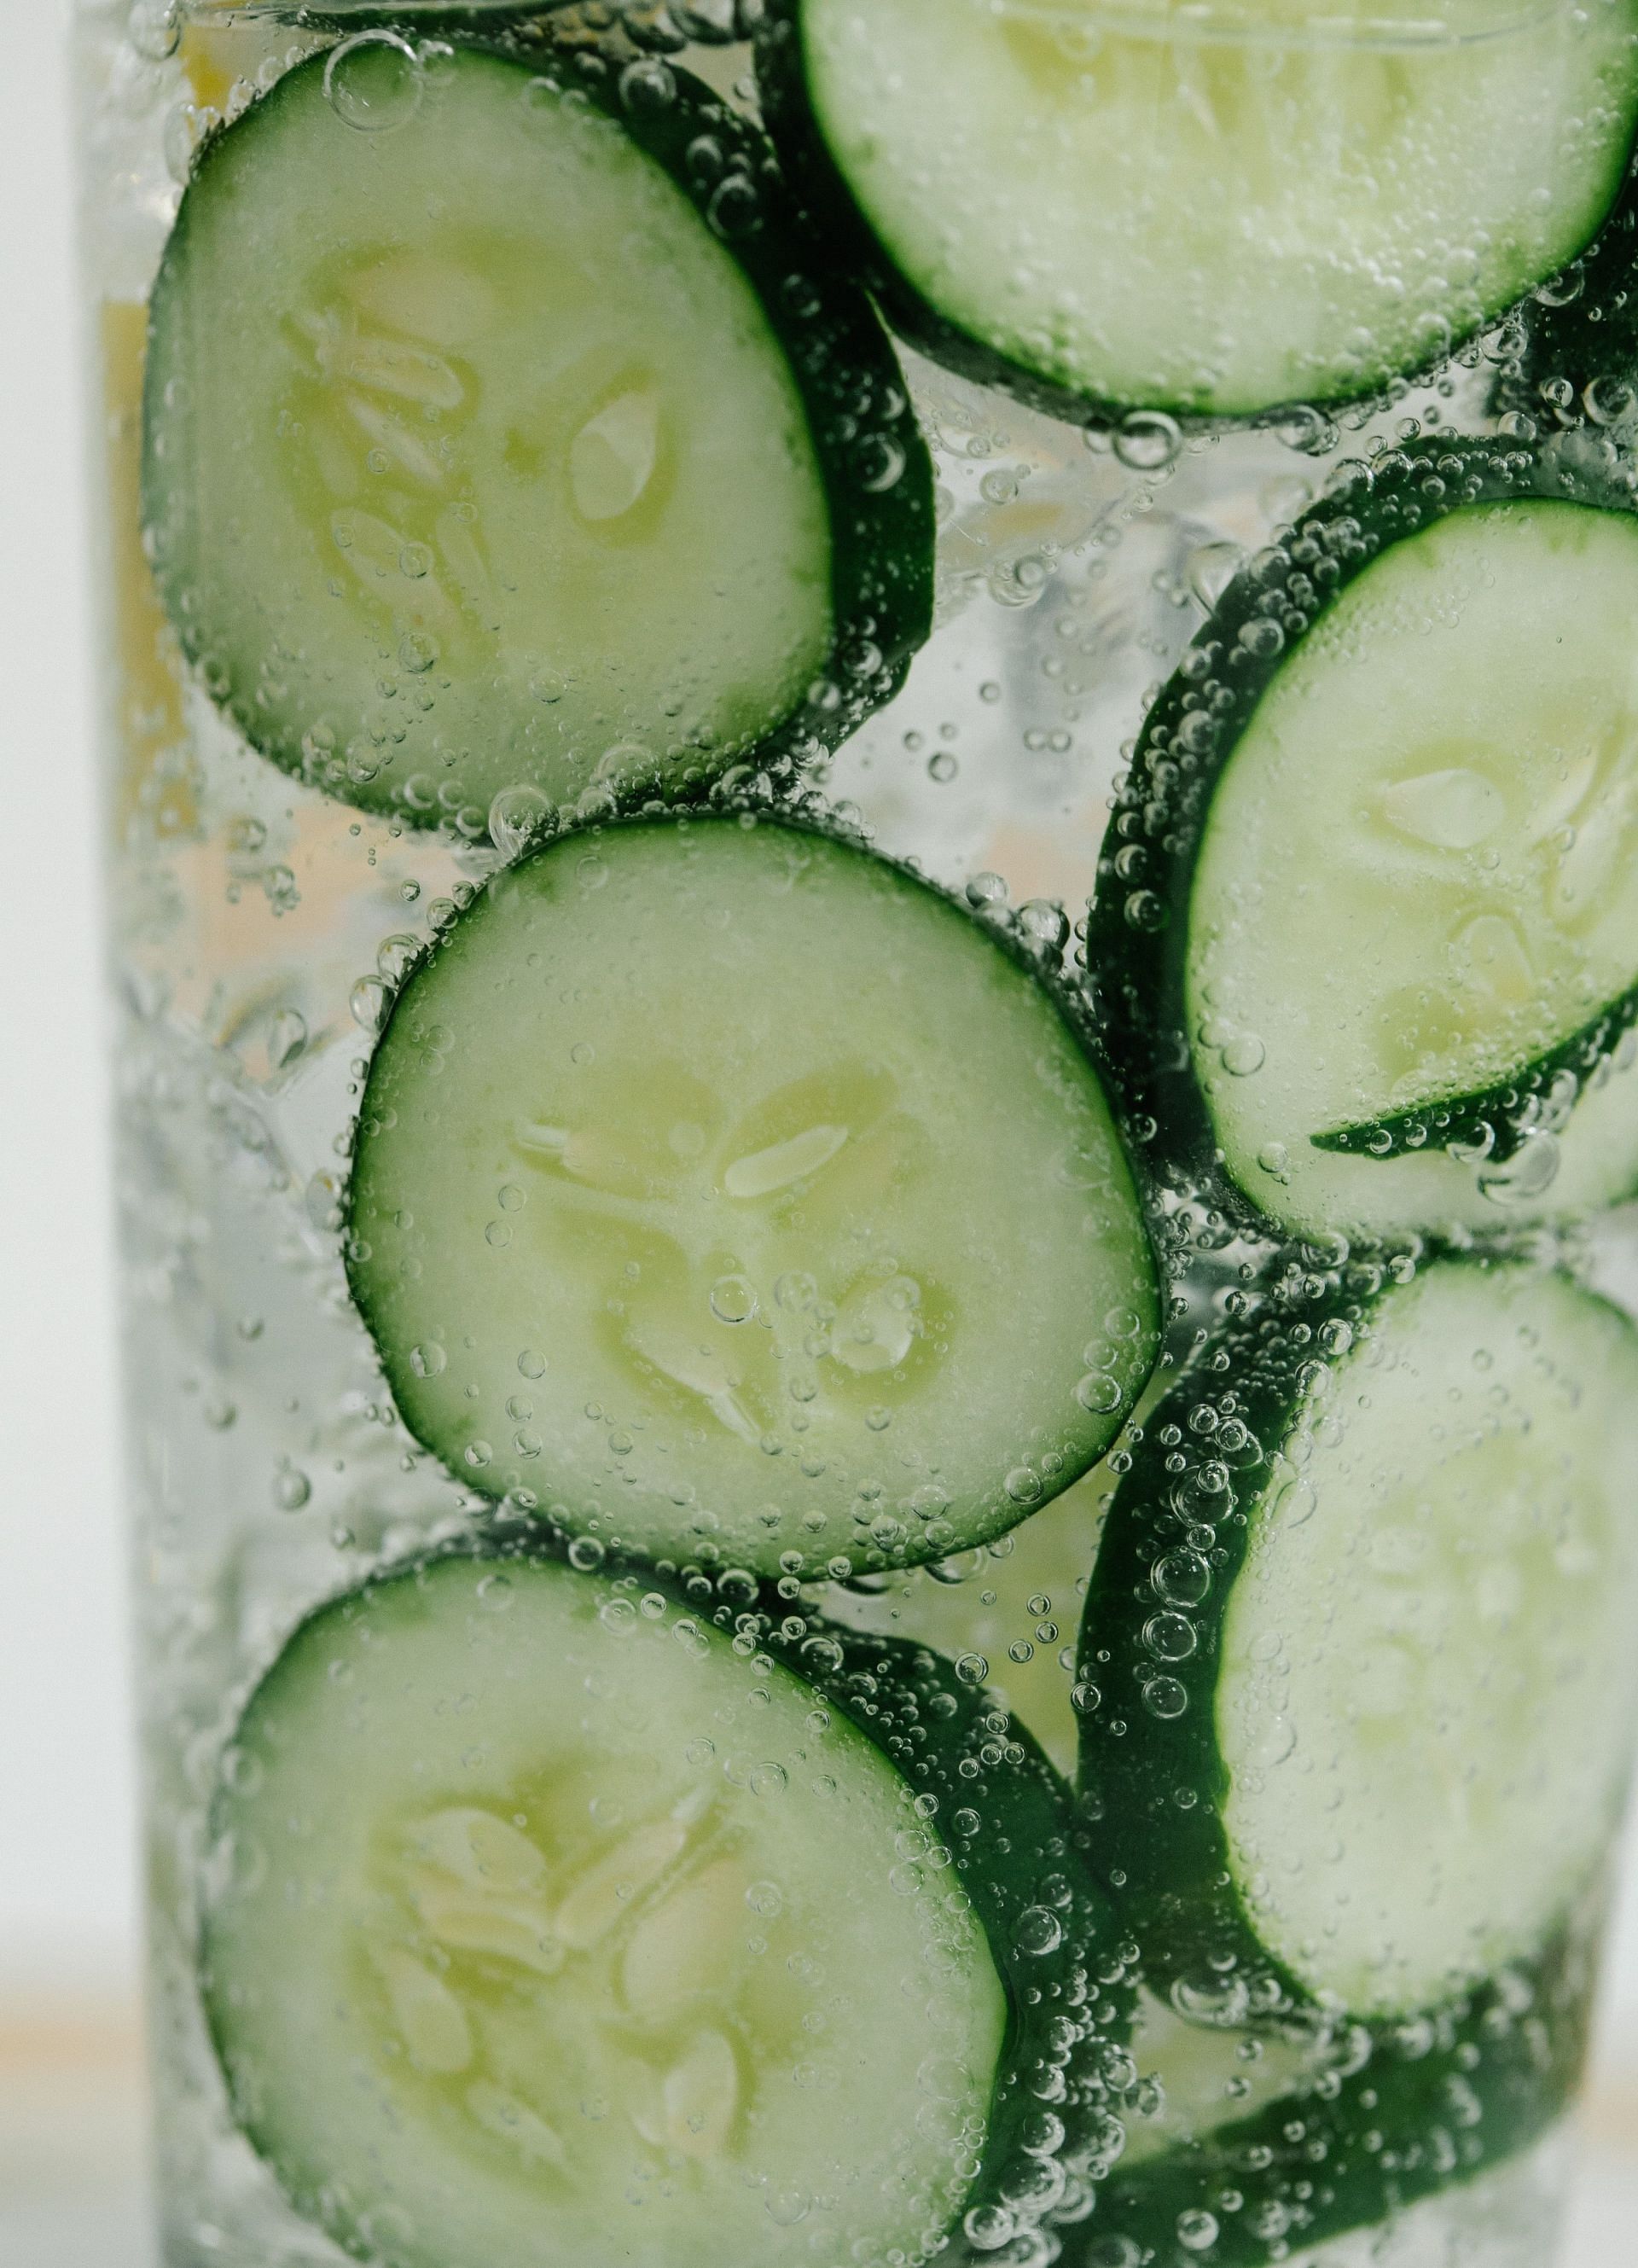 Cucumber contains natural vitamins and minerals that can help improve skin (Image via Pexels)